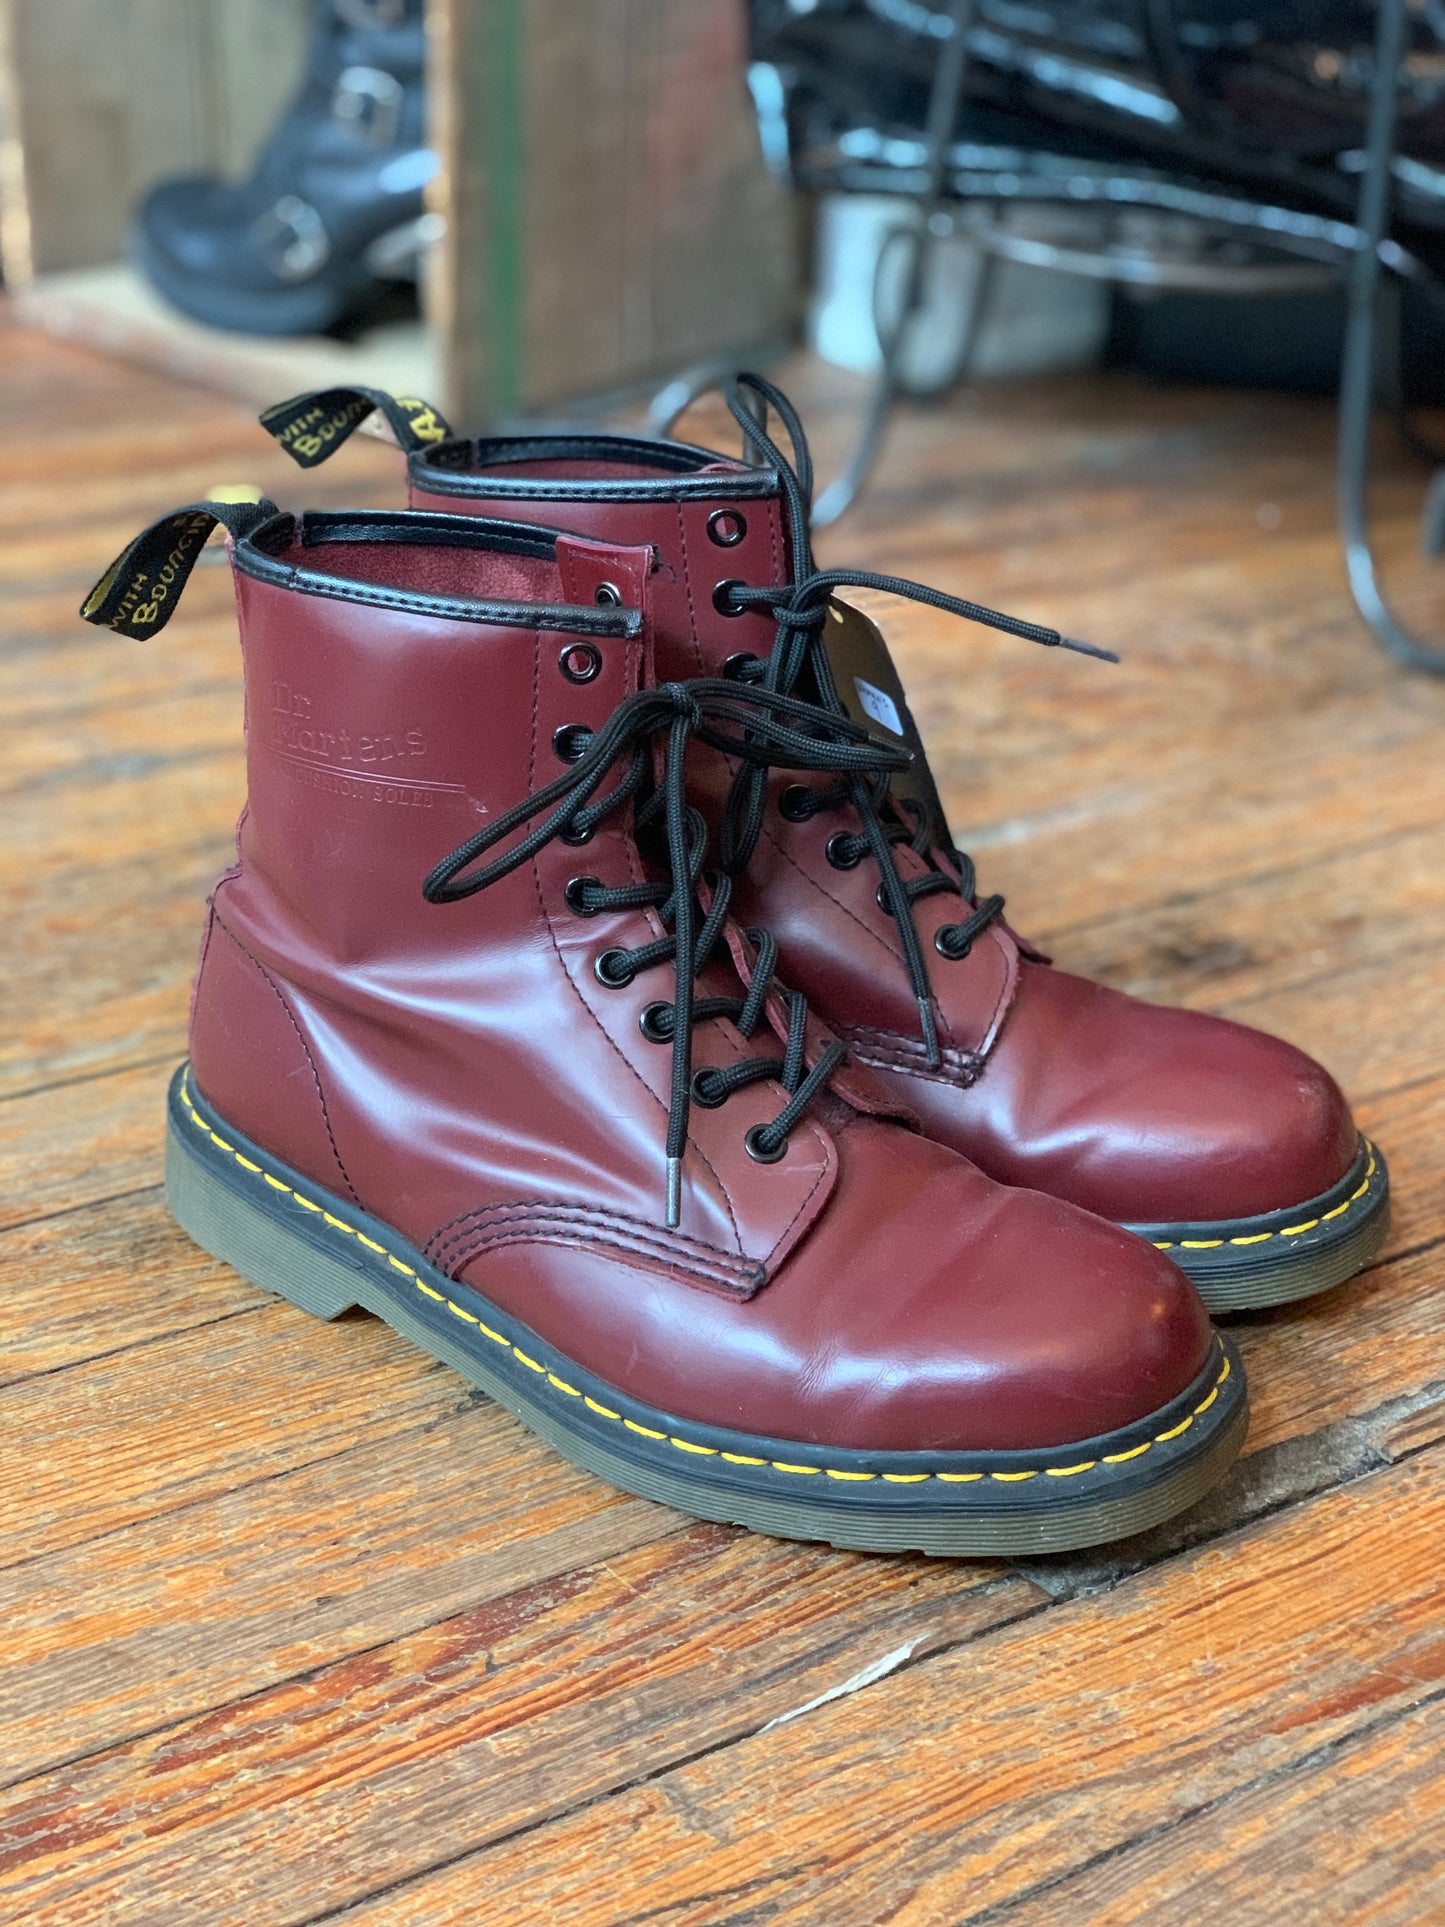 Classic Dr. Marten’s 1460 Smooth Leather Cherry Red Lace Up Boots